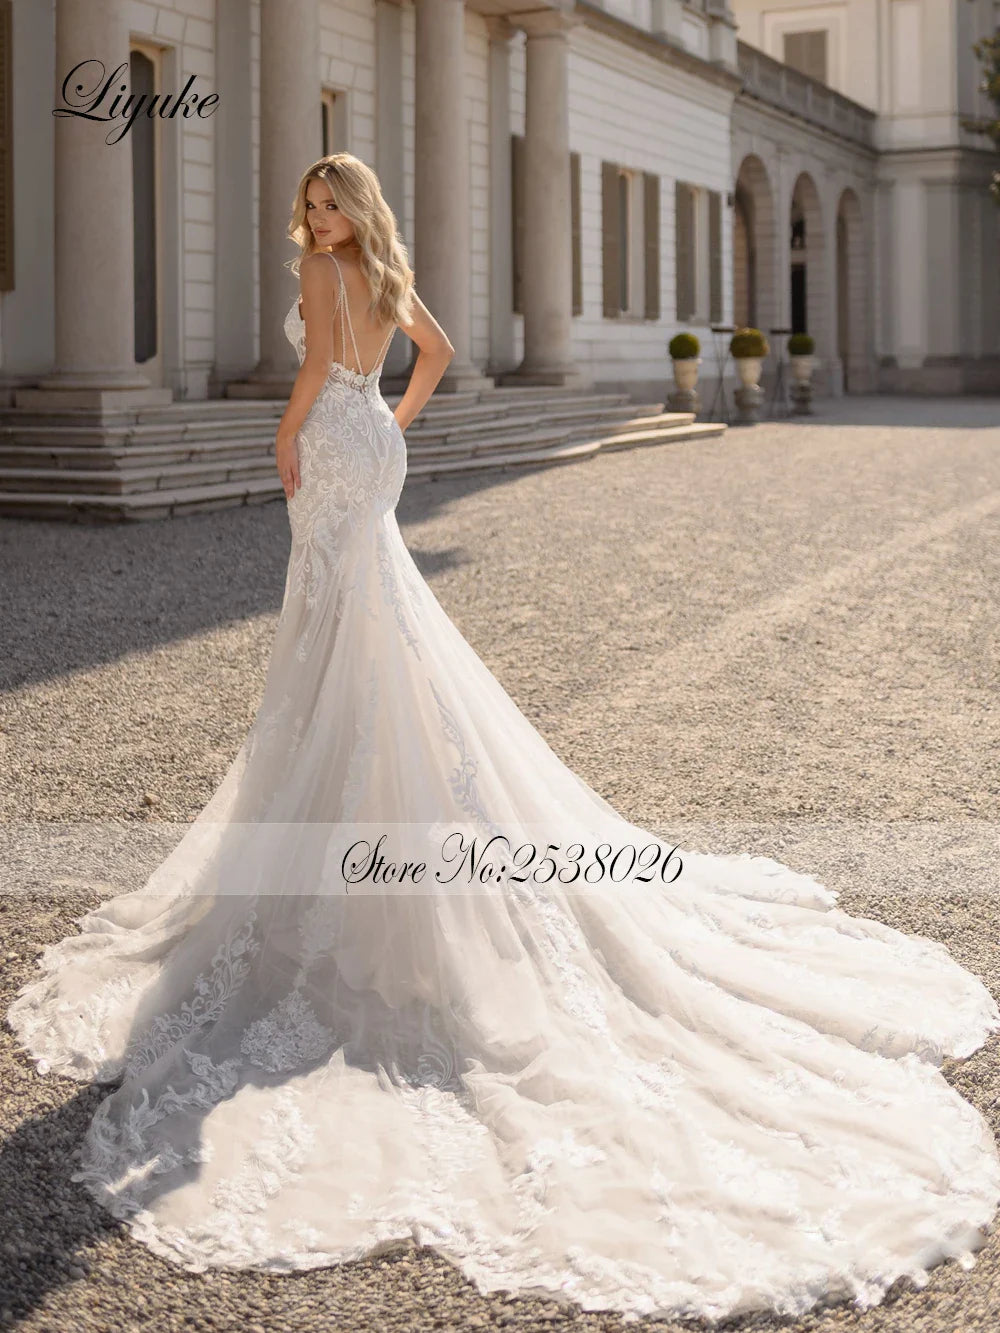 Stunning Sweetheart Mermaid Wedding Dresses Impressing Beaded Pearls aghetti Straps Appliques Lace Bridal Gowns